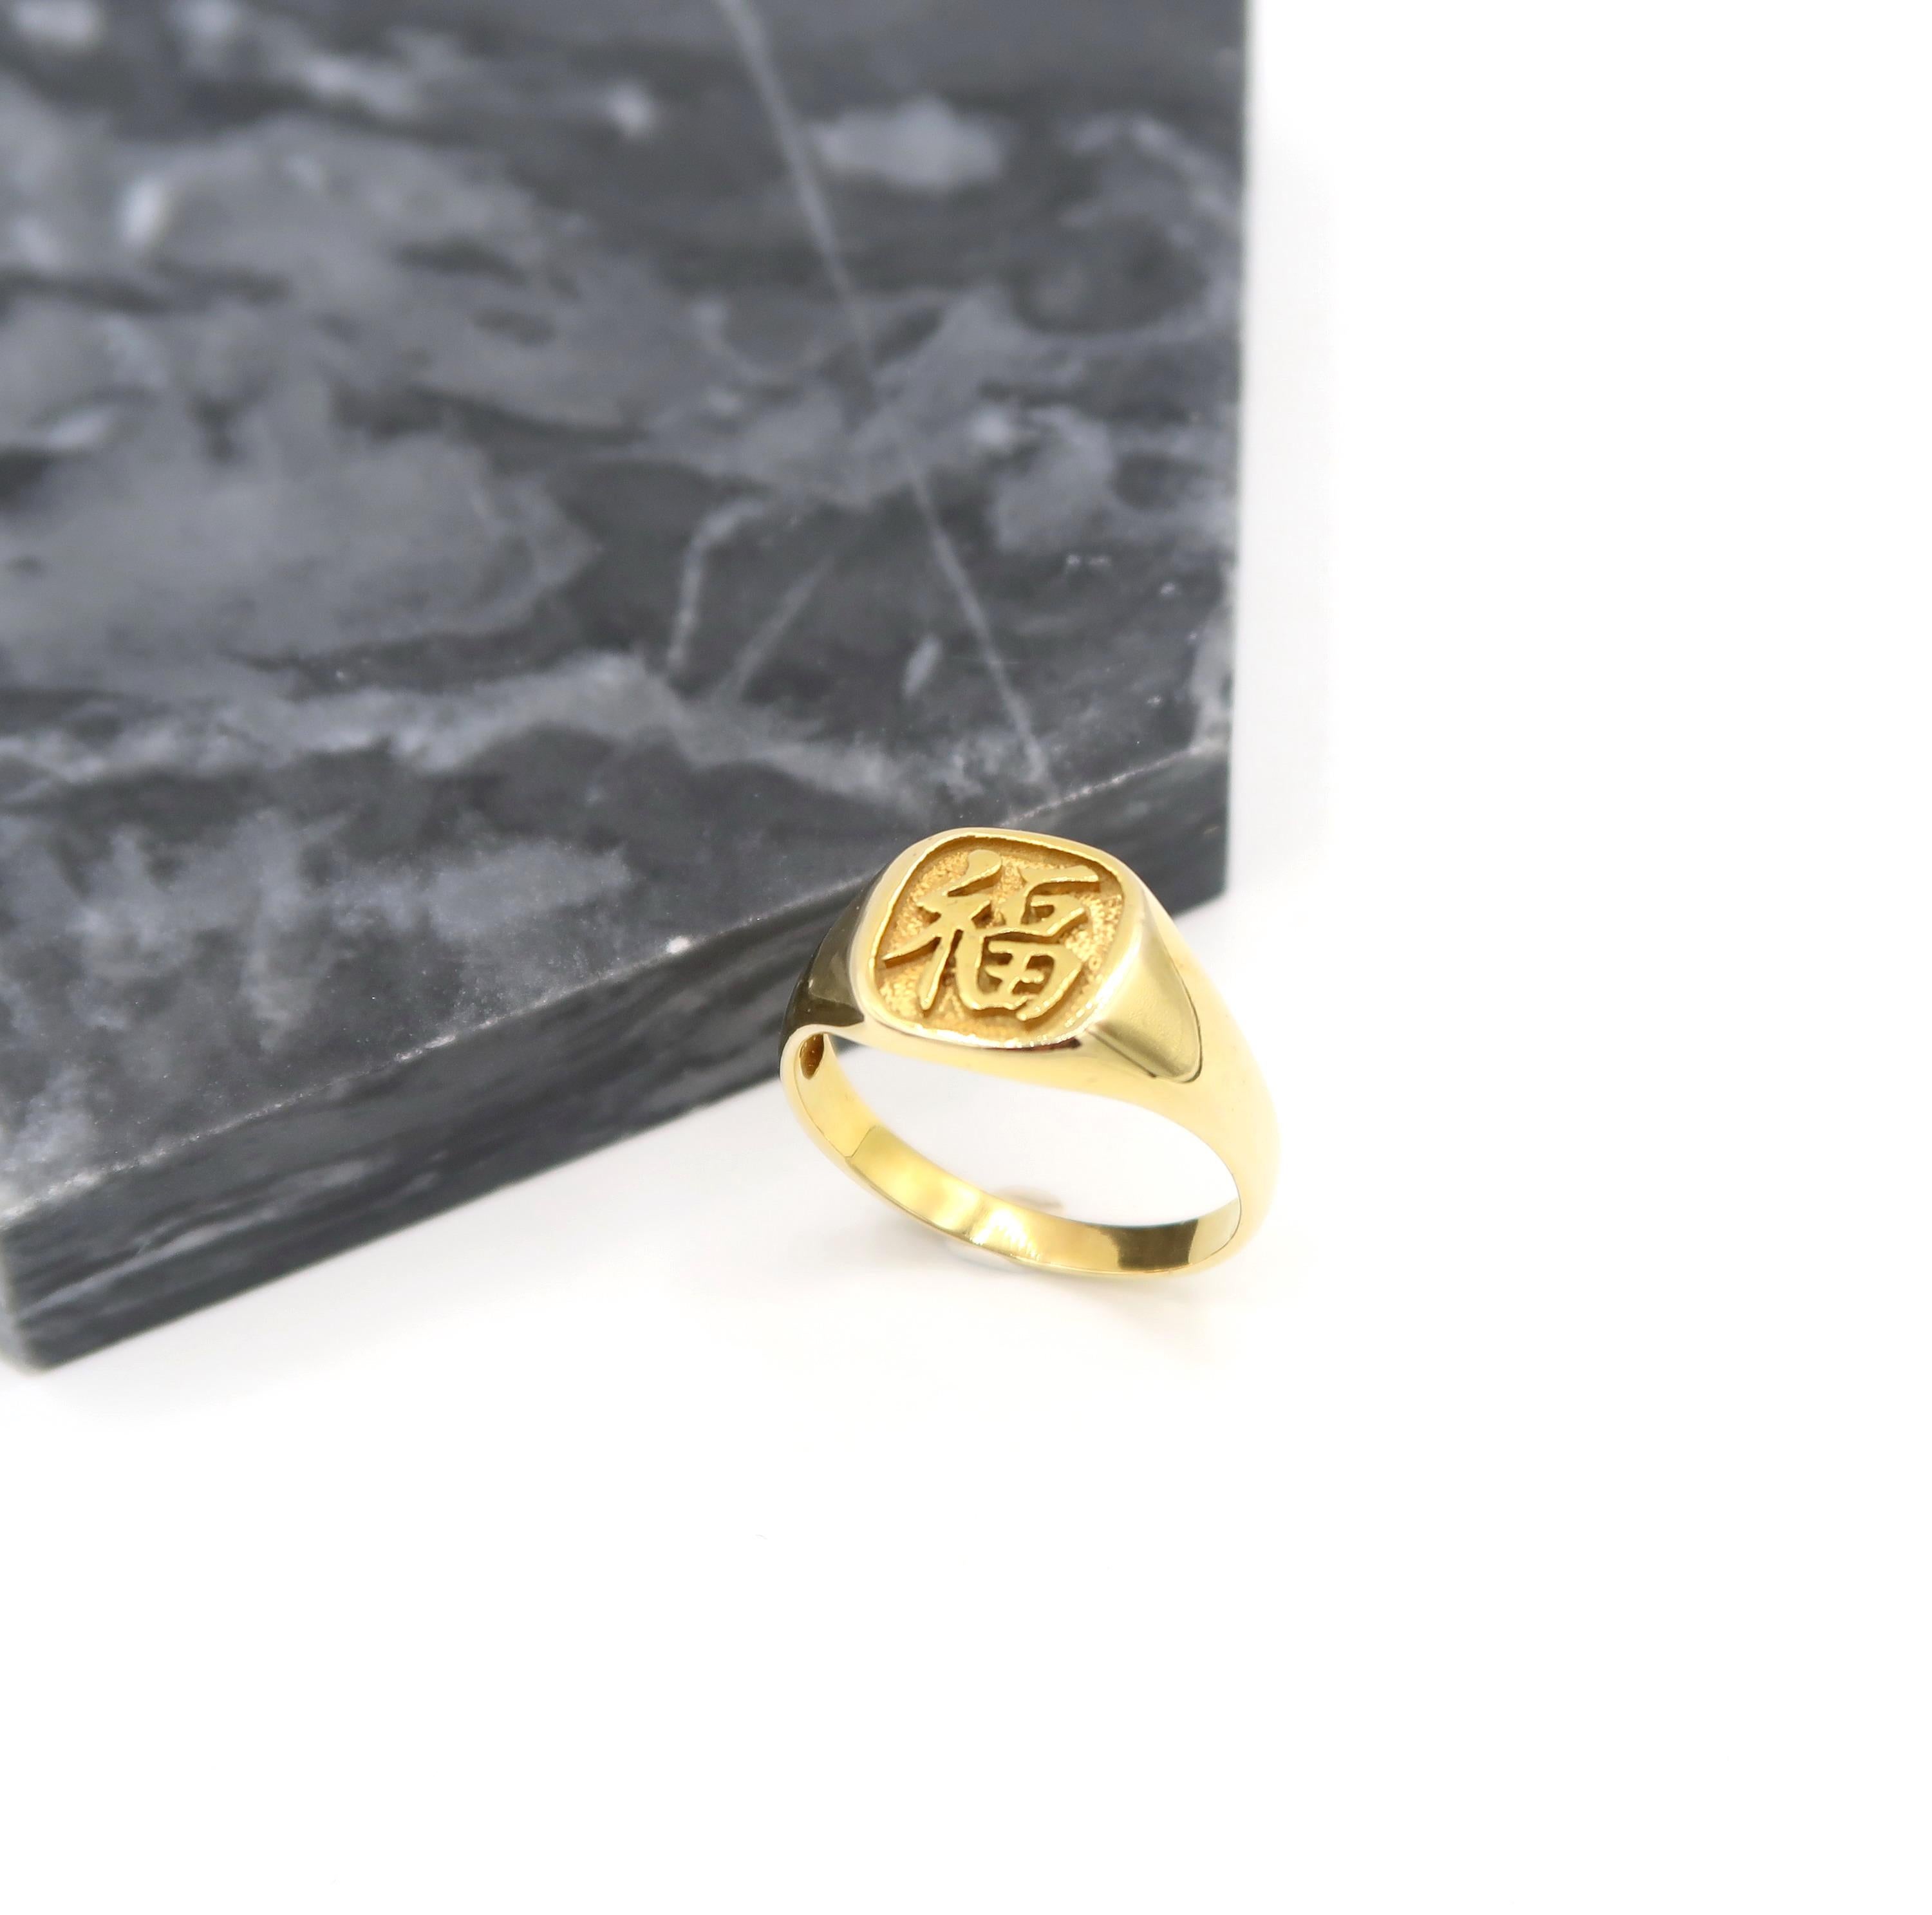 Chinese Character Fortune Luck Happiness Sterling Silver Signet Men's Ring

Please let us know upon checkout should you wish to have the ring resized. 
Ring size: 55